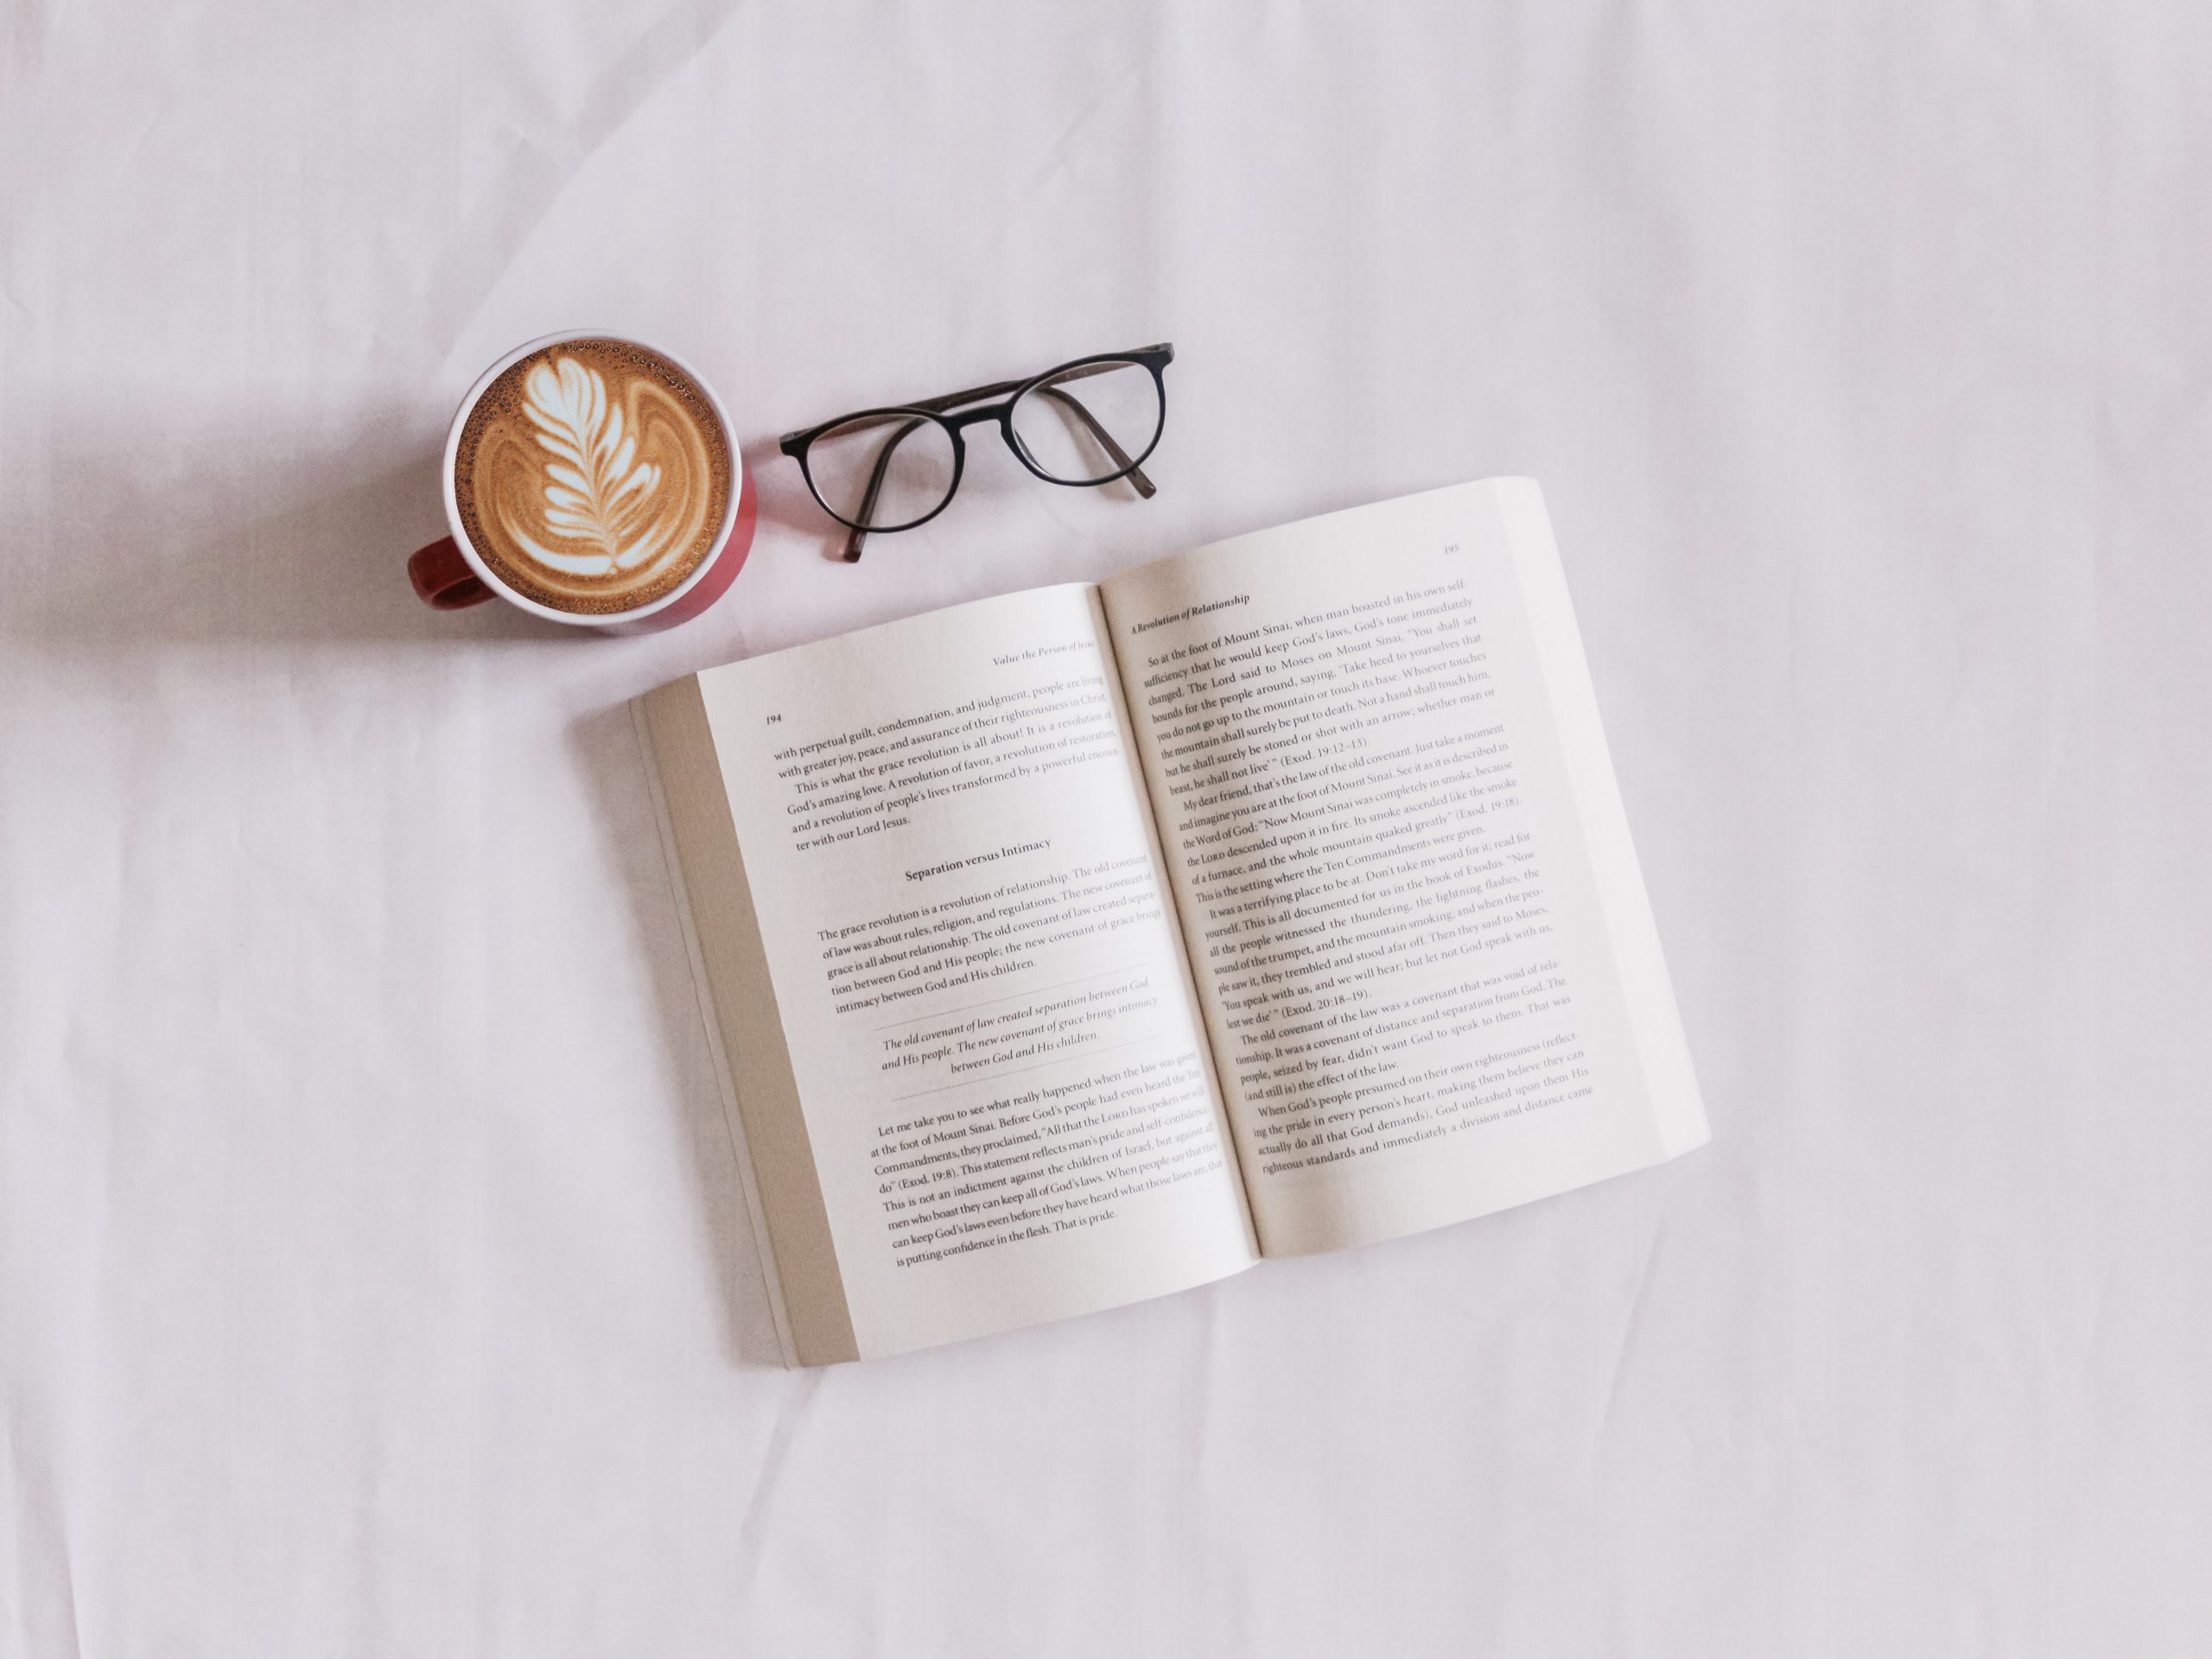 Book lying on a white sheet next to a pair of glasses and a cup of coffee